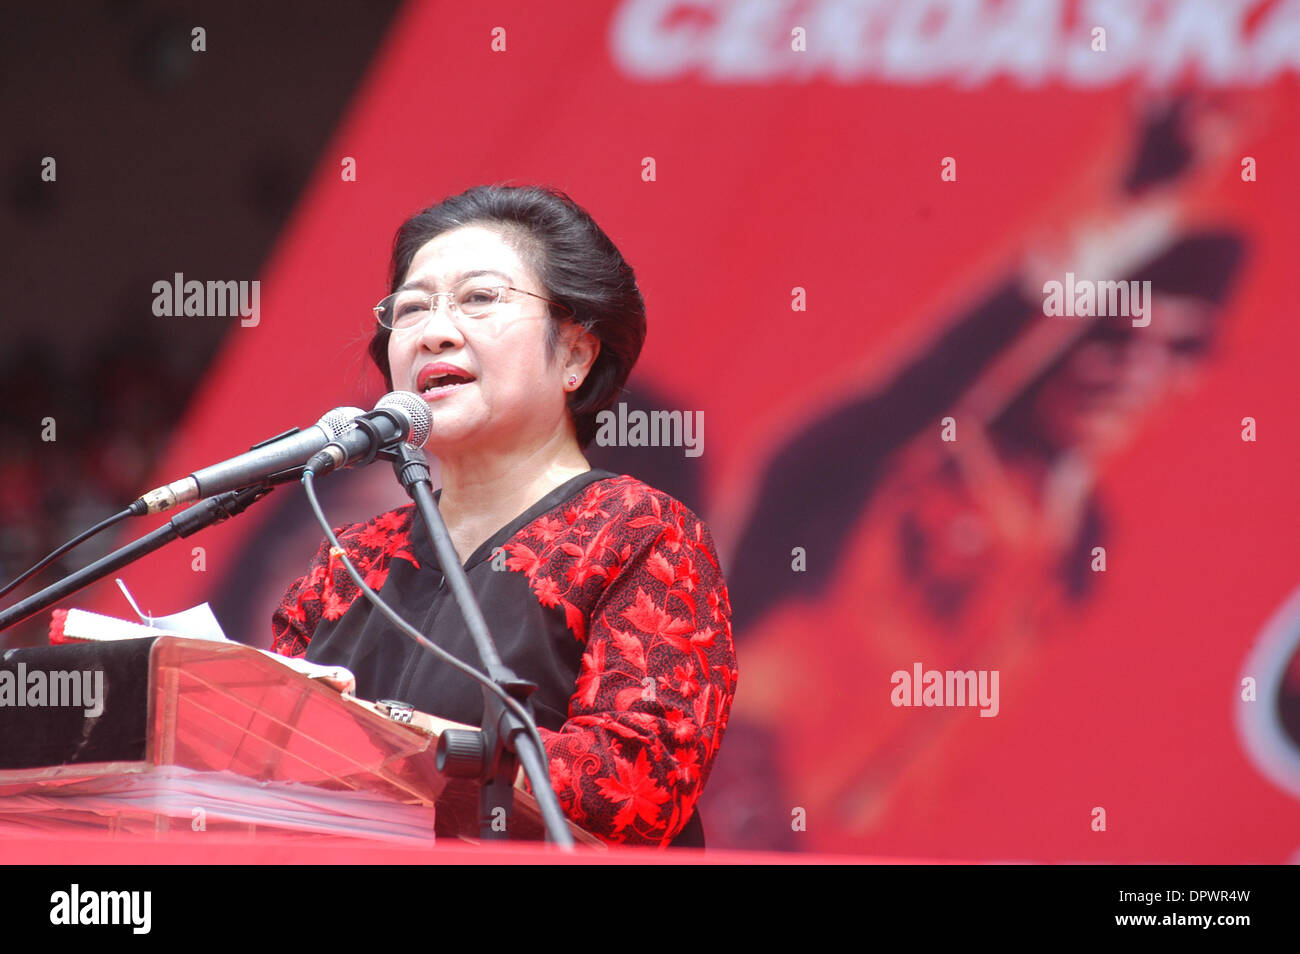 Apr 05, 2009 - Jakarta, Indonesia - Former president and the leader of the Indonesian Democratic Party in Struggle (PDI Perjuangan), MEGAWATI SUKARNO PUTRI gestures during the campaign in Jakarta, Indonesia, April 4, 2009. Legislative elections for the 128 seats of the Regional Representatives Council and the 560 seats of the People's Representative Council will be held in Indonesi Stock Photo